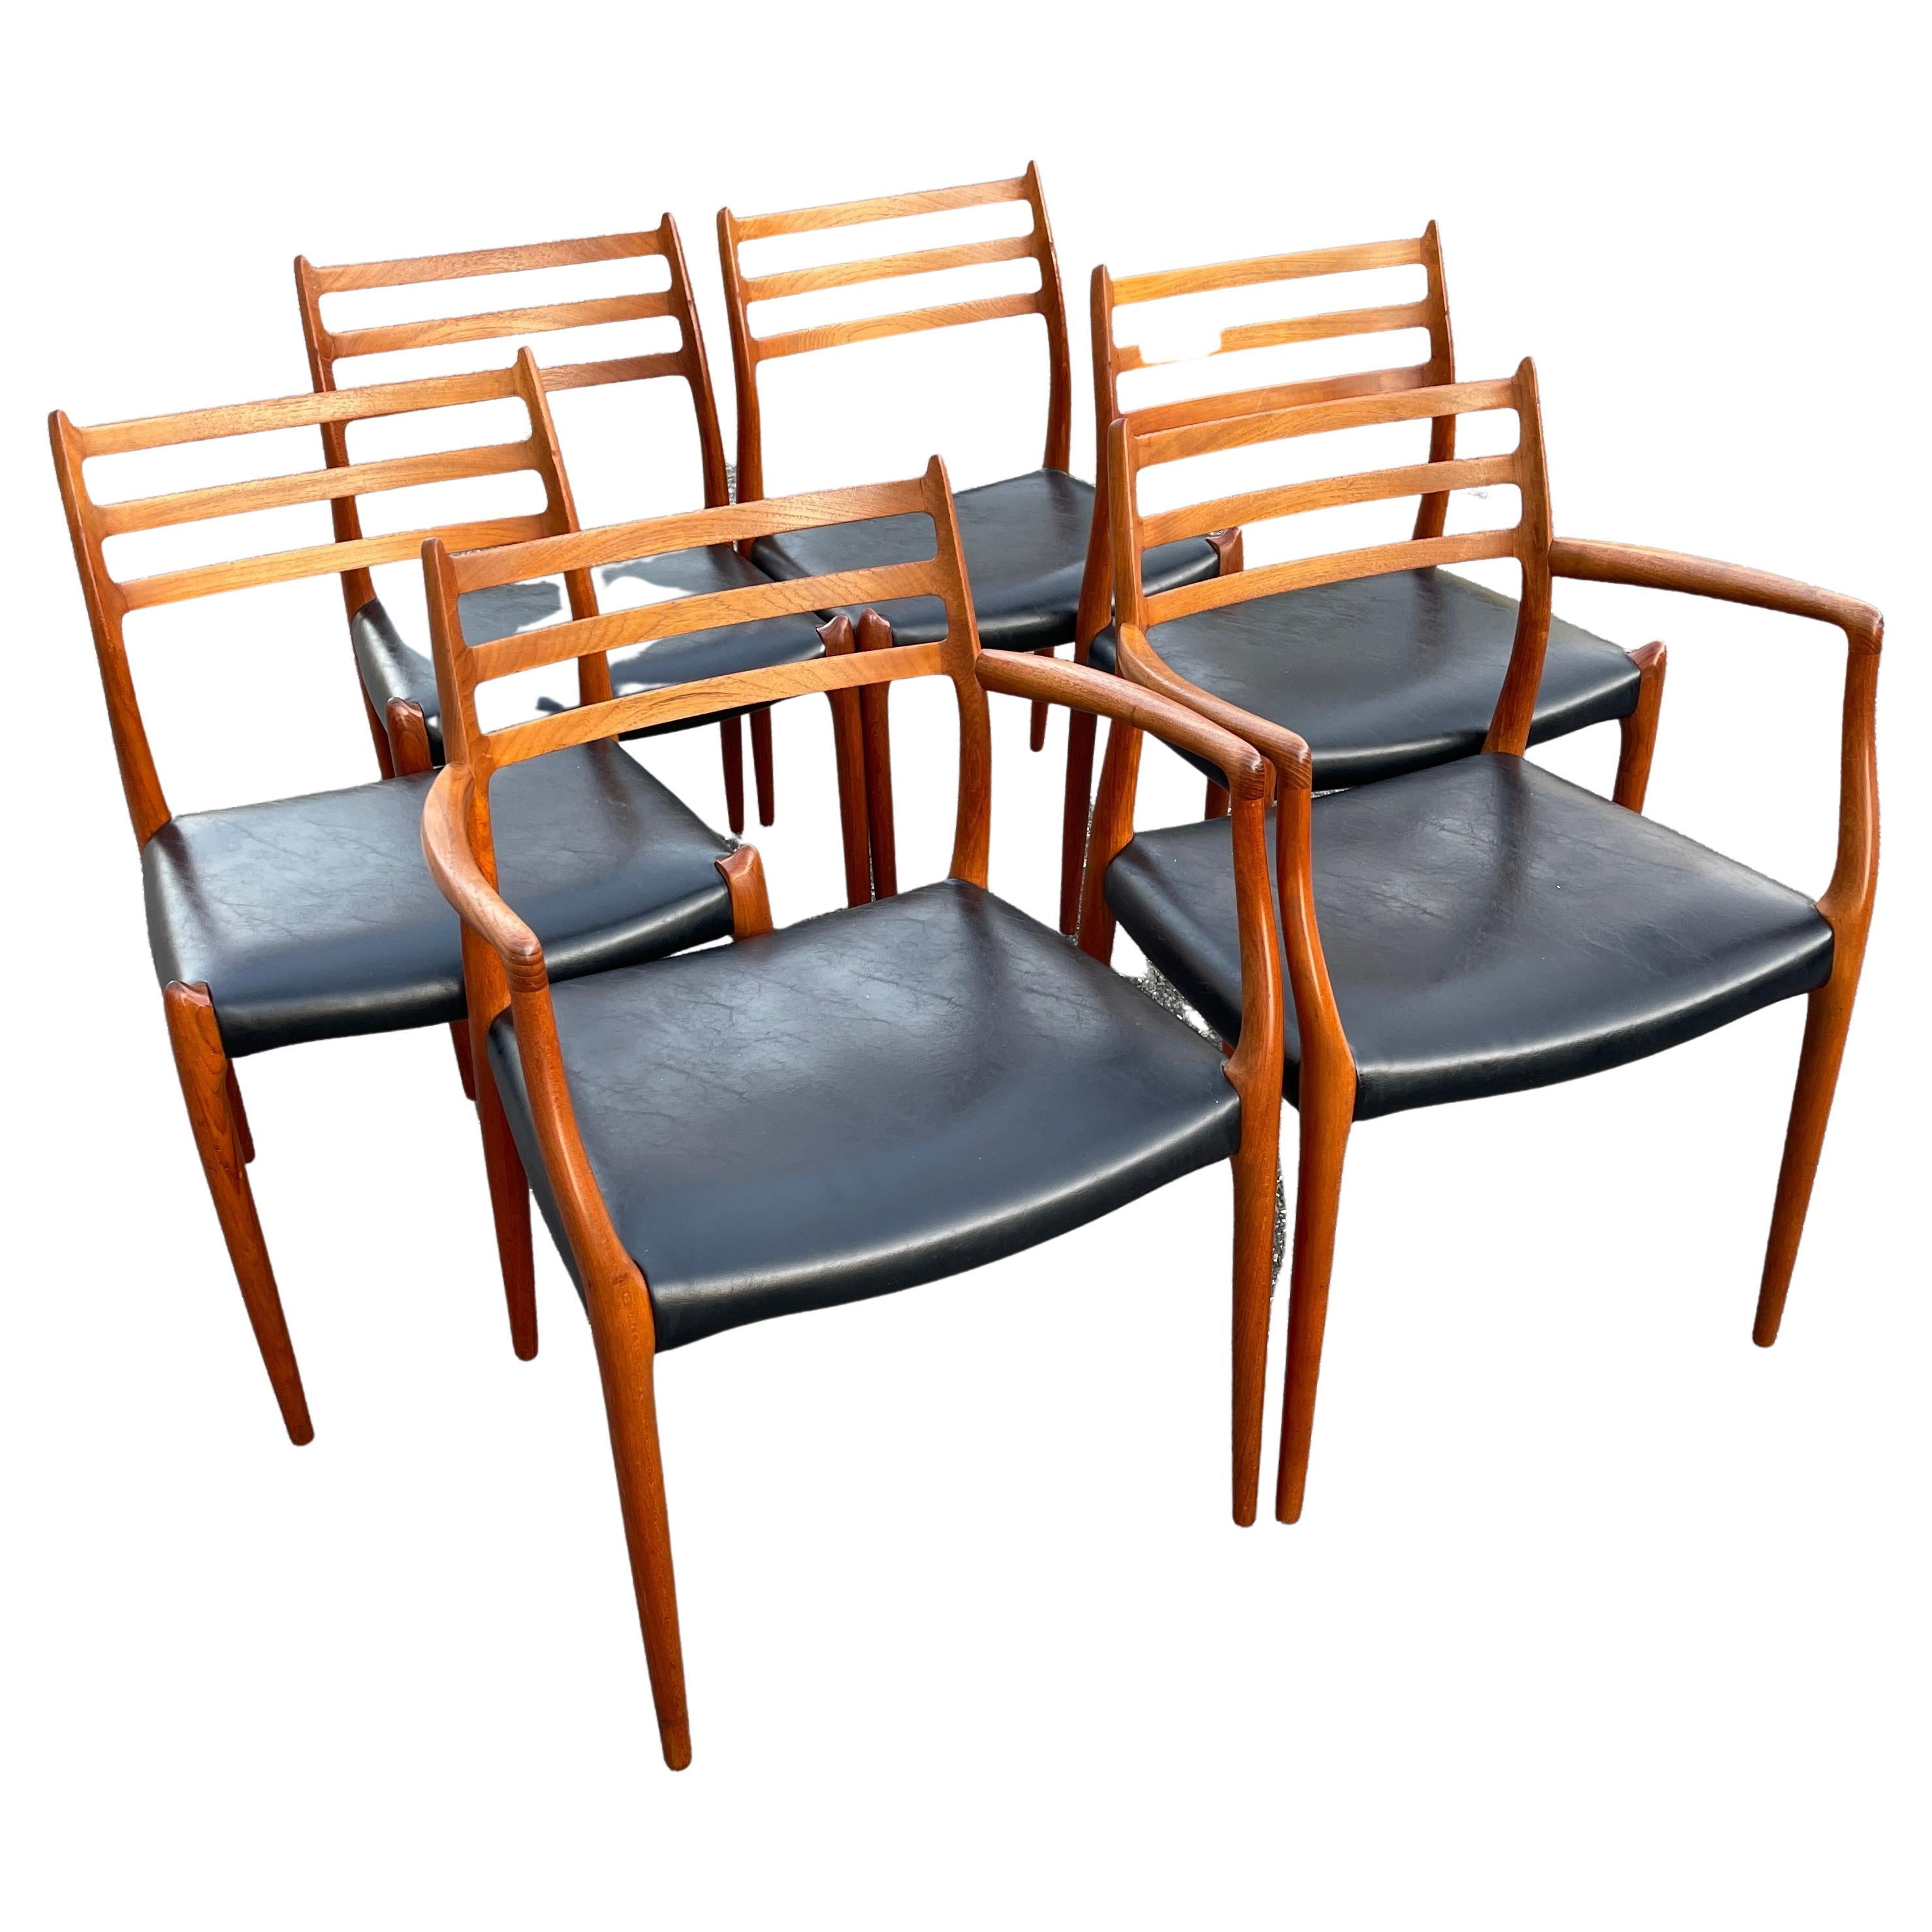 Hand-Crafted Set of Six 6 Danish Mid-Century Modern Dining Chairs, Niels Moller